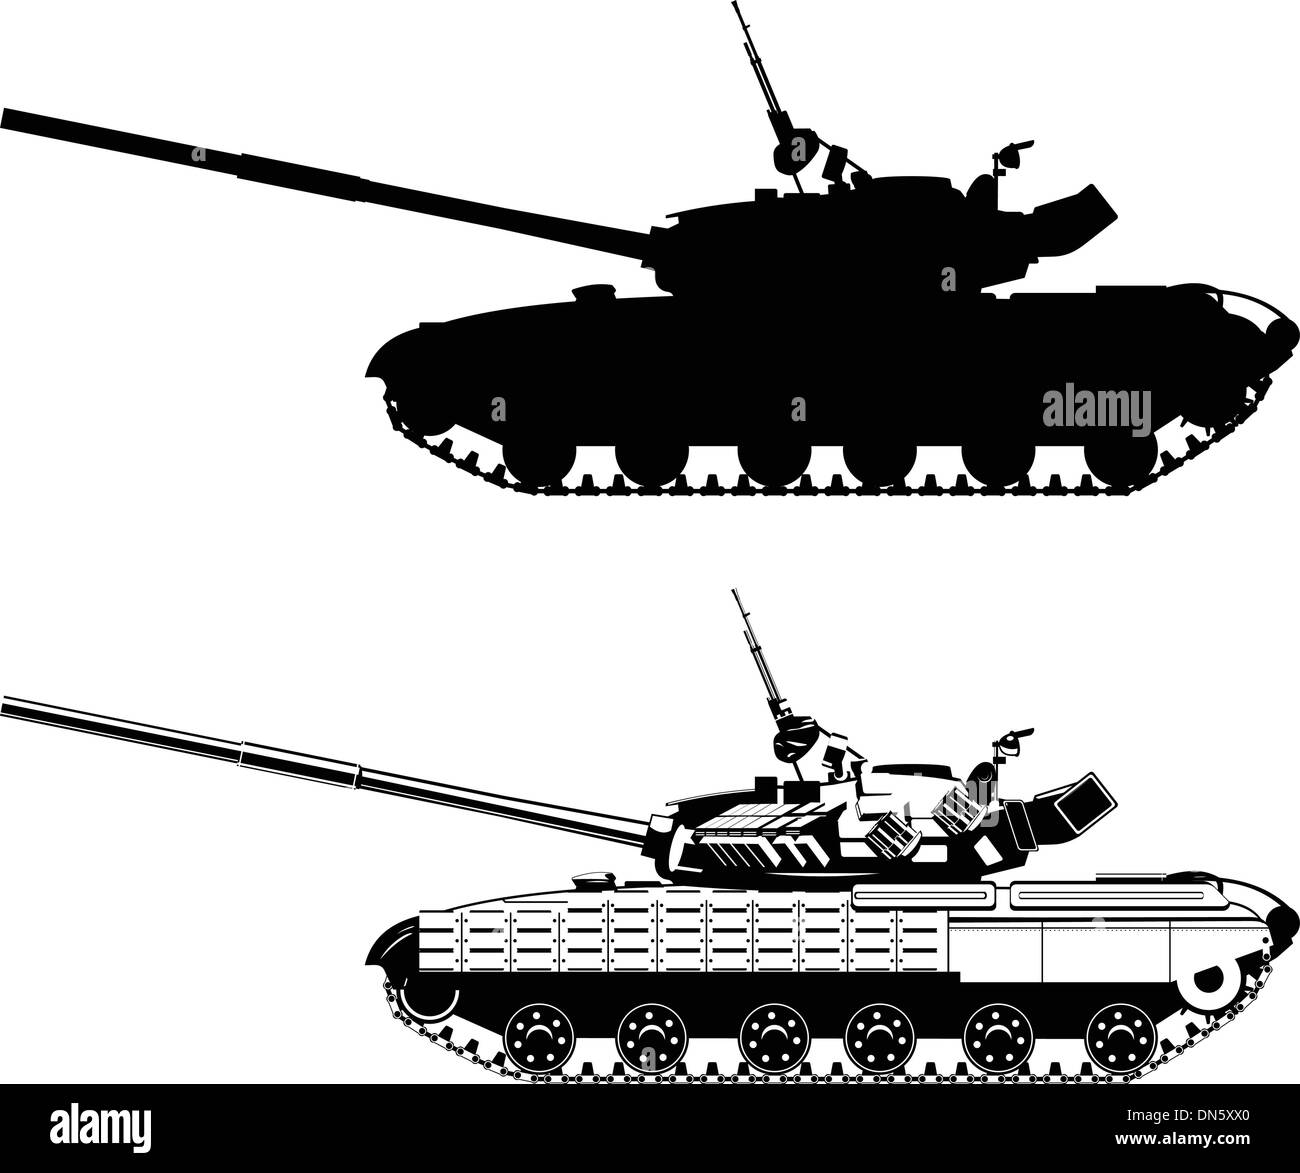 Tank Black and White Stock Photos & Images - Alamy